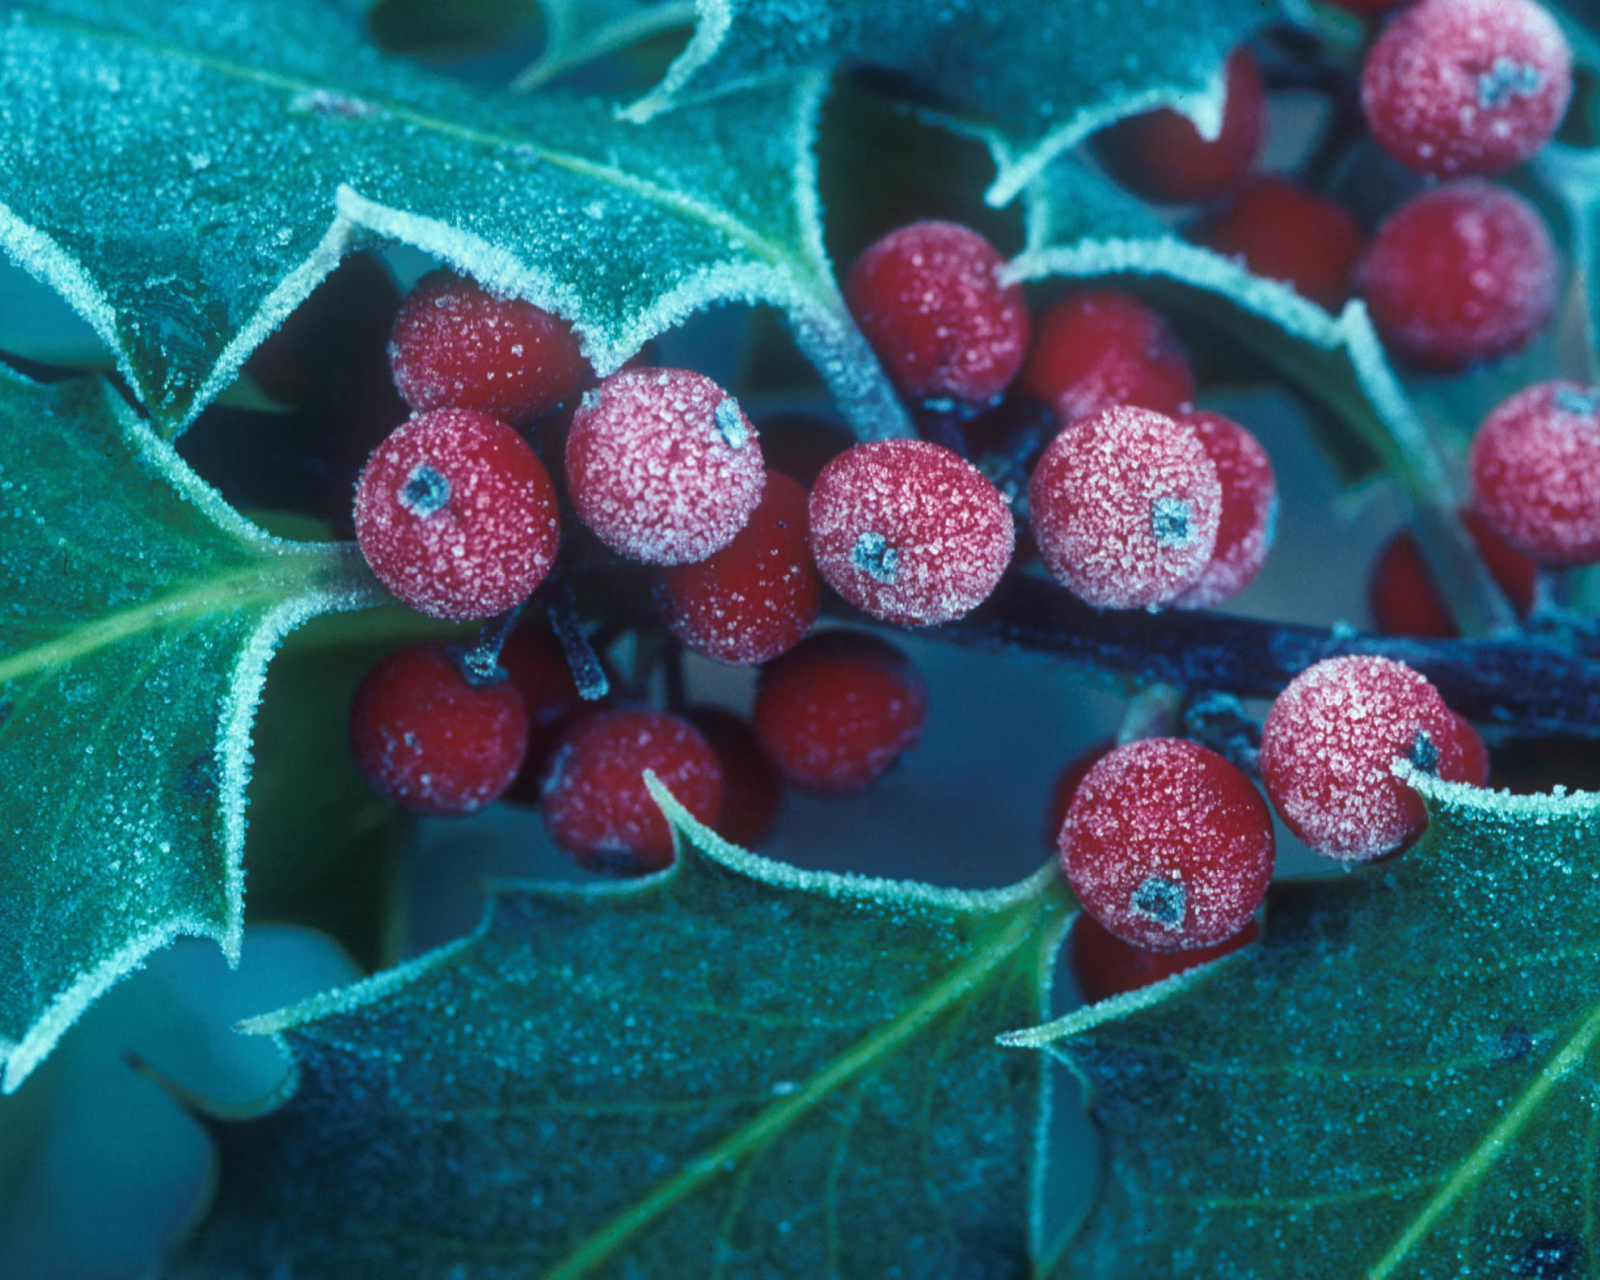 Frosted Holly Berries wallpaper 1600x1280